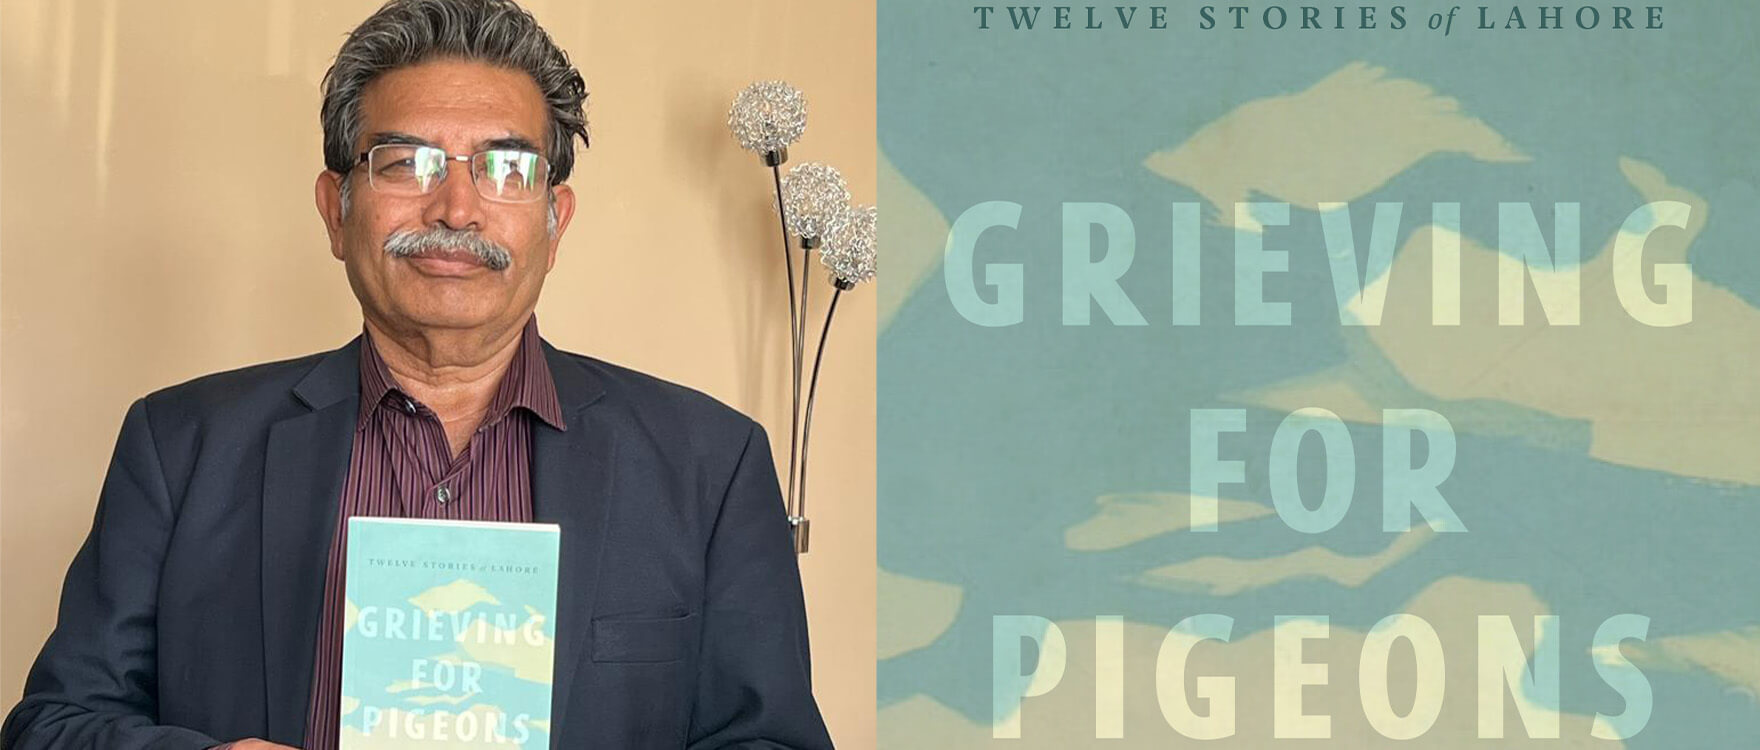 Zubair Ahmad holding book Grieving for Pigeons Punjabi to English translation - featured image